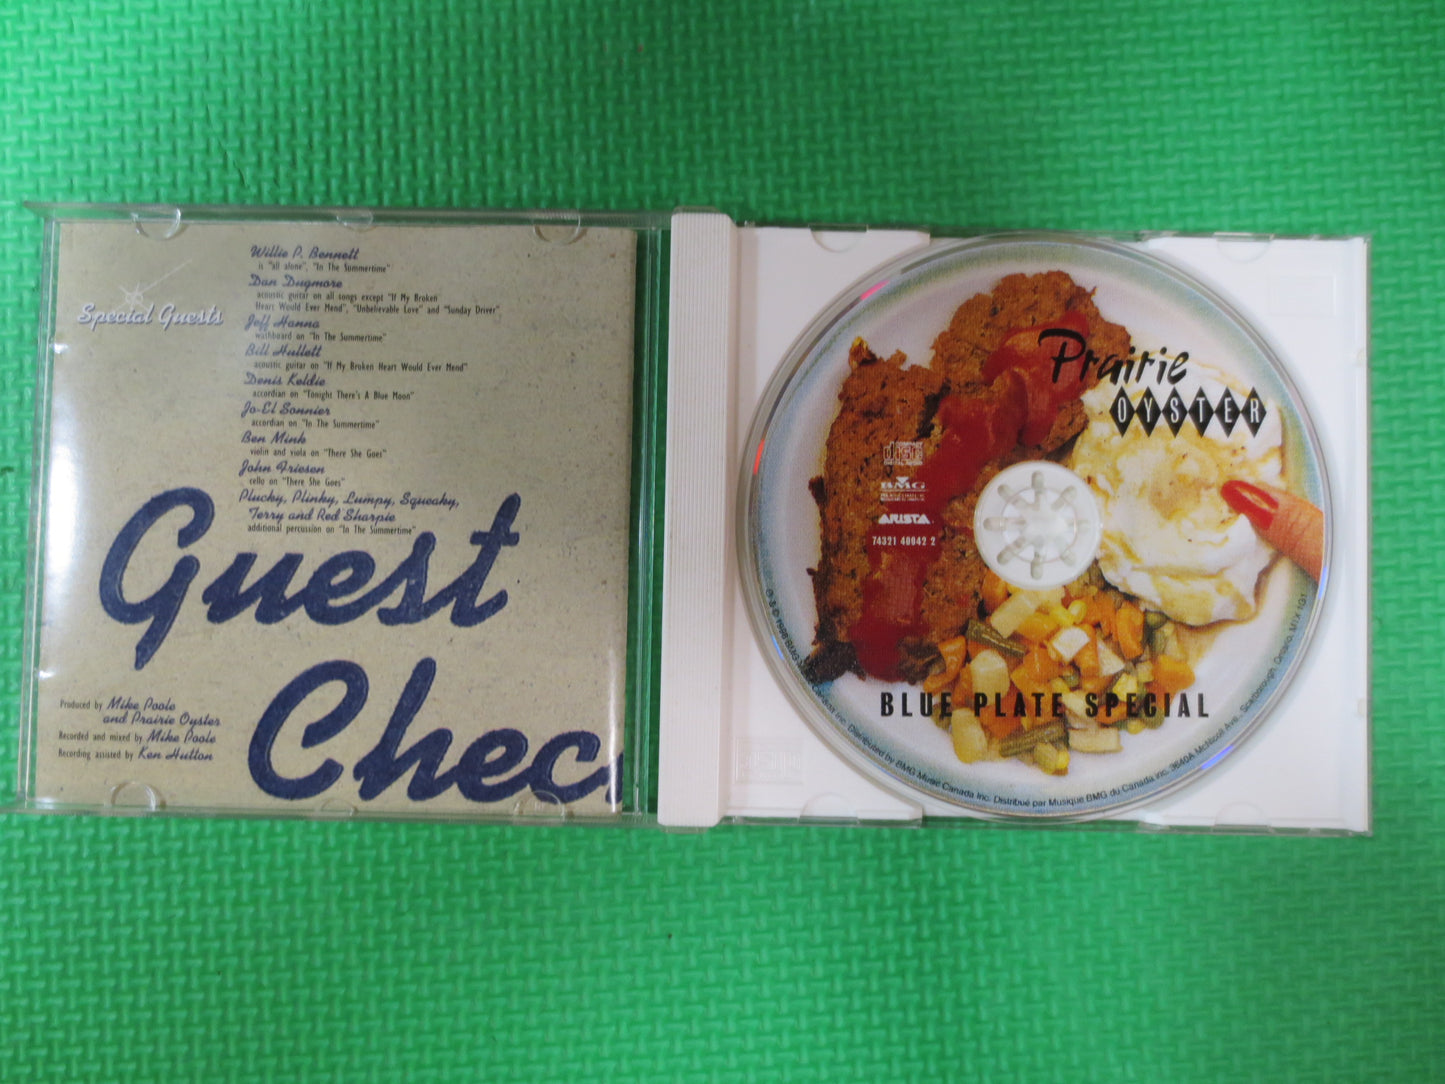 PRAIRIE OYSTER, Prairie Oyster Cd, Blue Plate SPECIAL, Country Cd, Pop Cd, Country Lp, Country Album, 1986 Compact Discs